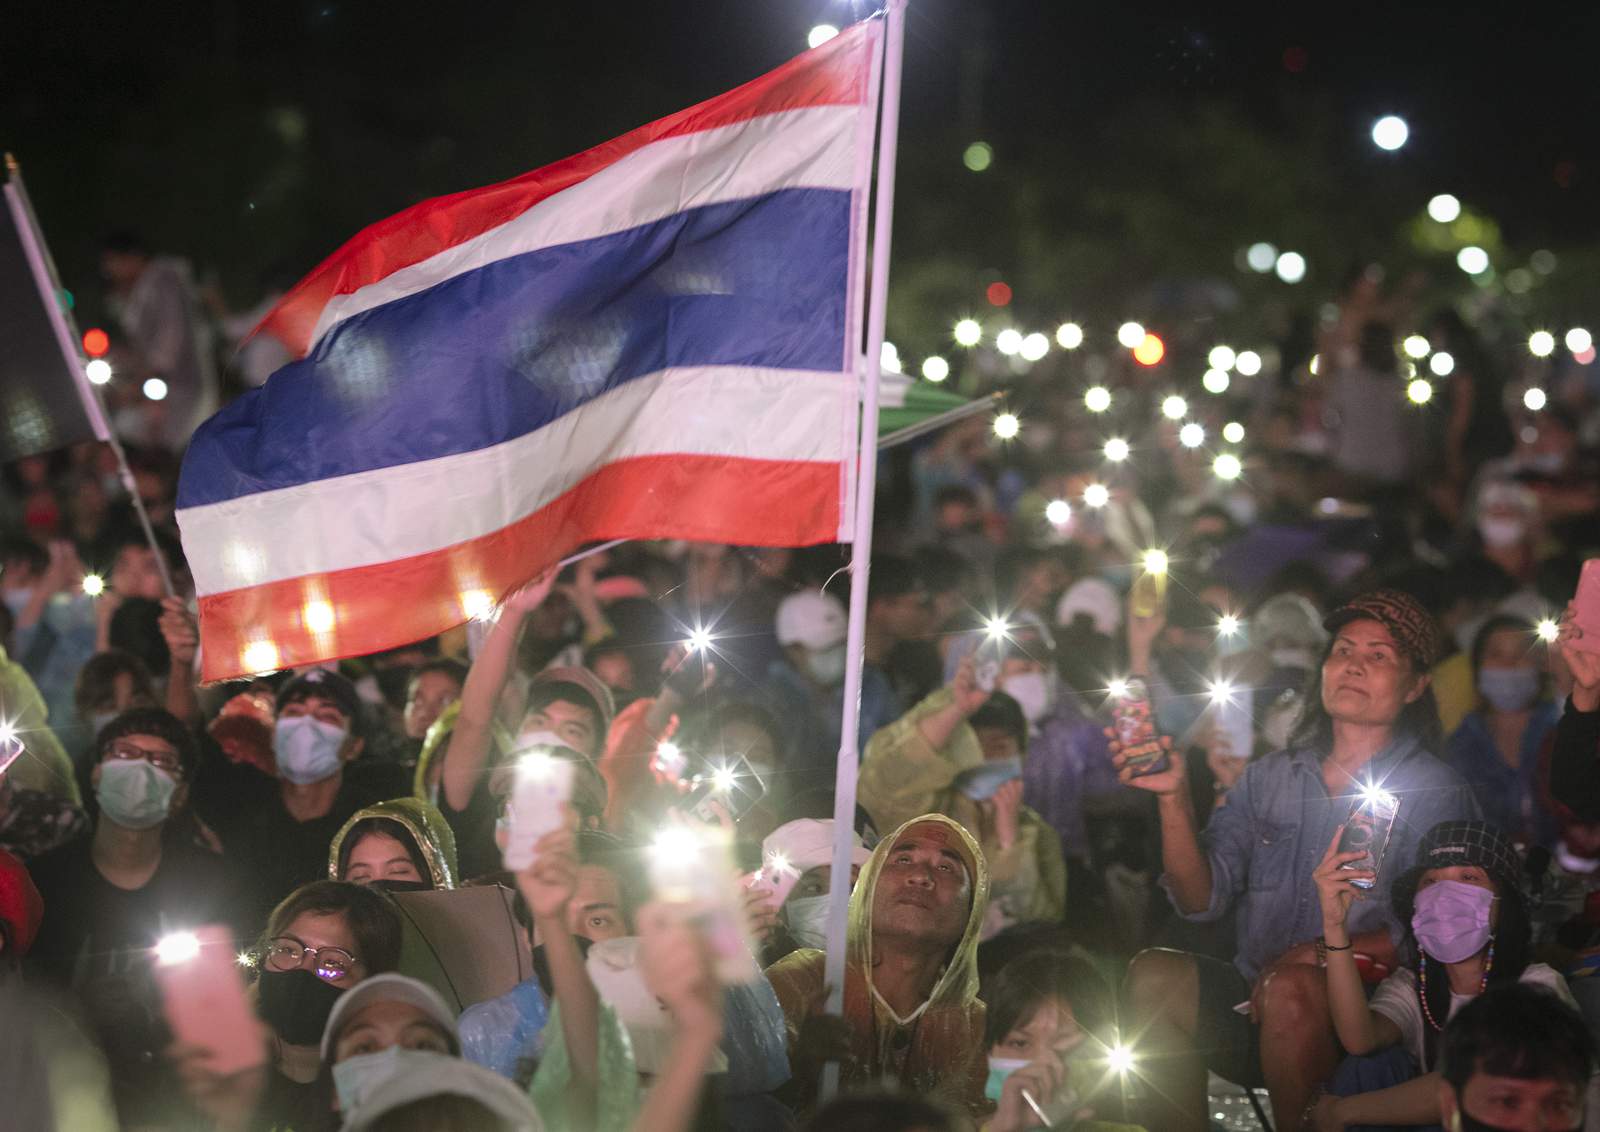 Thai protesters' rally pushes demands for democratic reforms